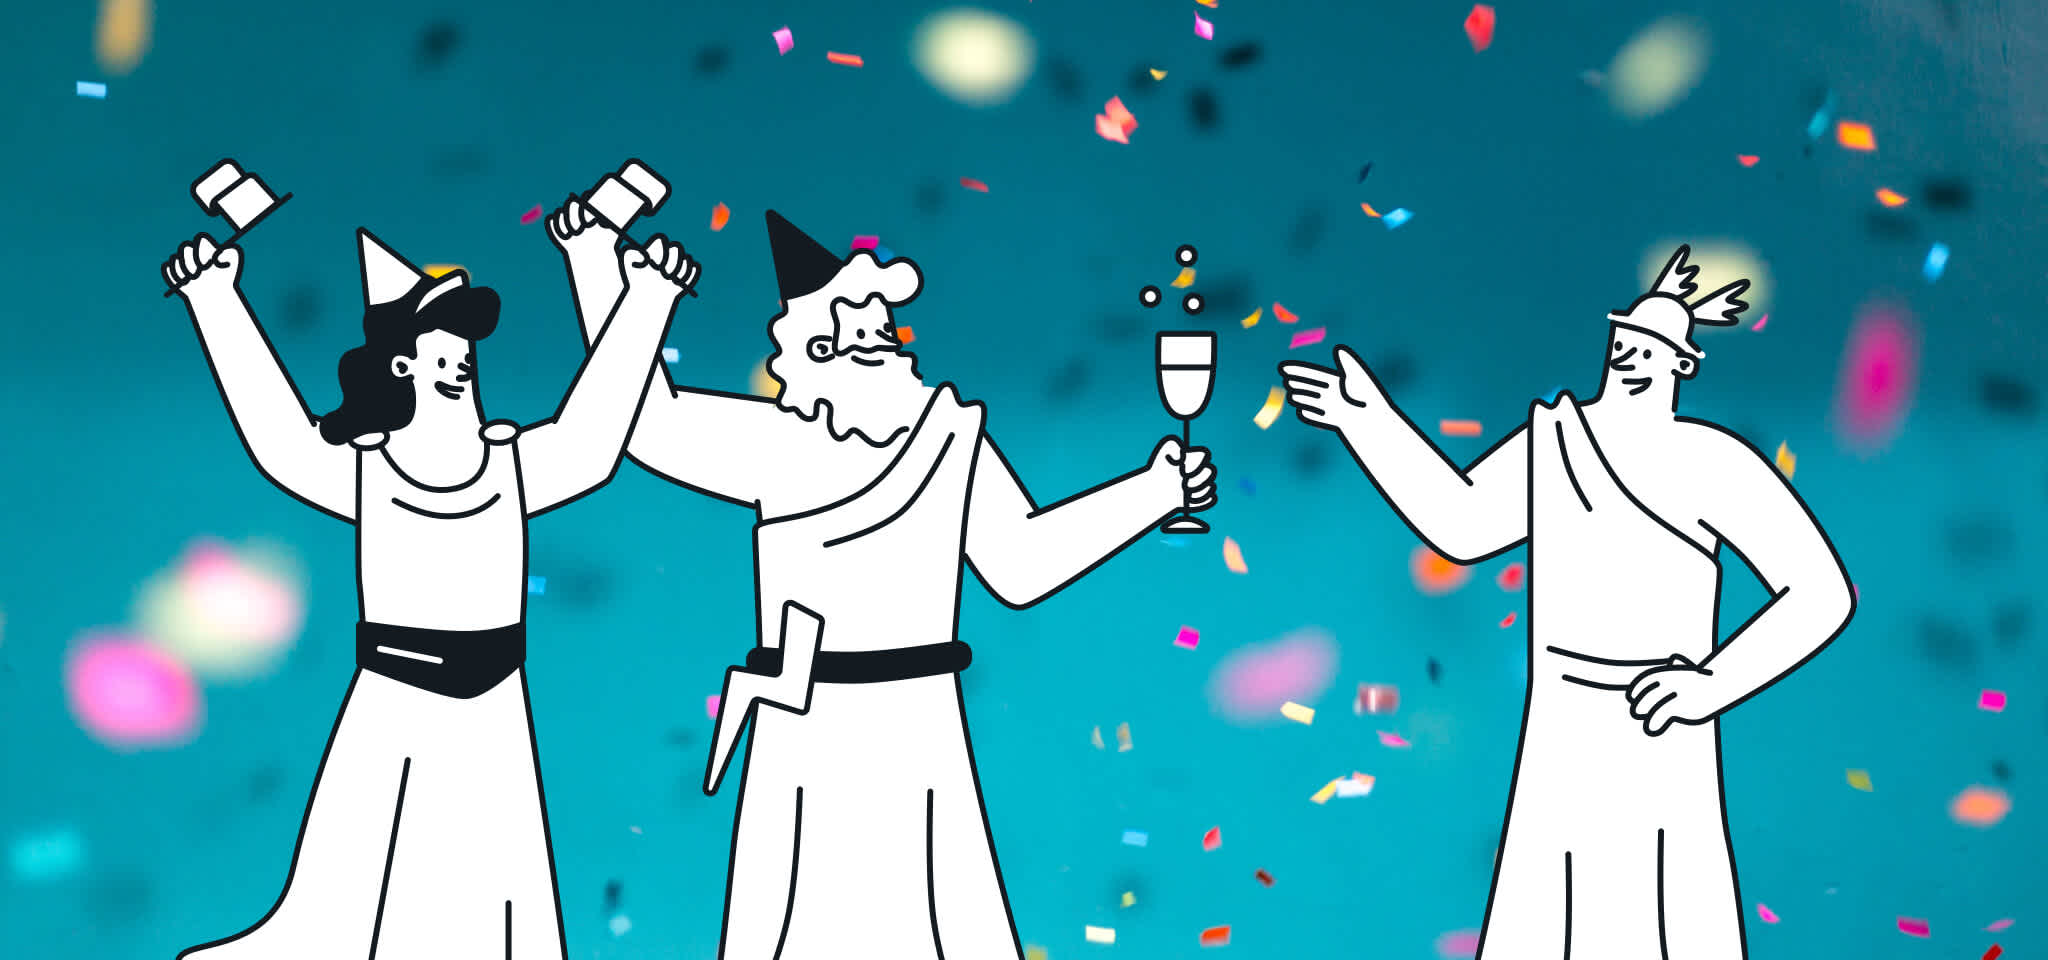 Hermes and two other Gods celebrating a party in front of some confetti